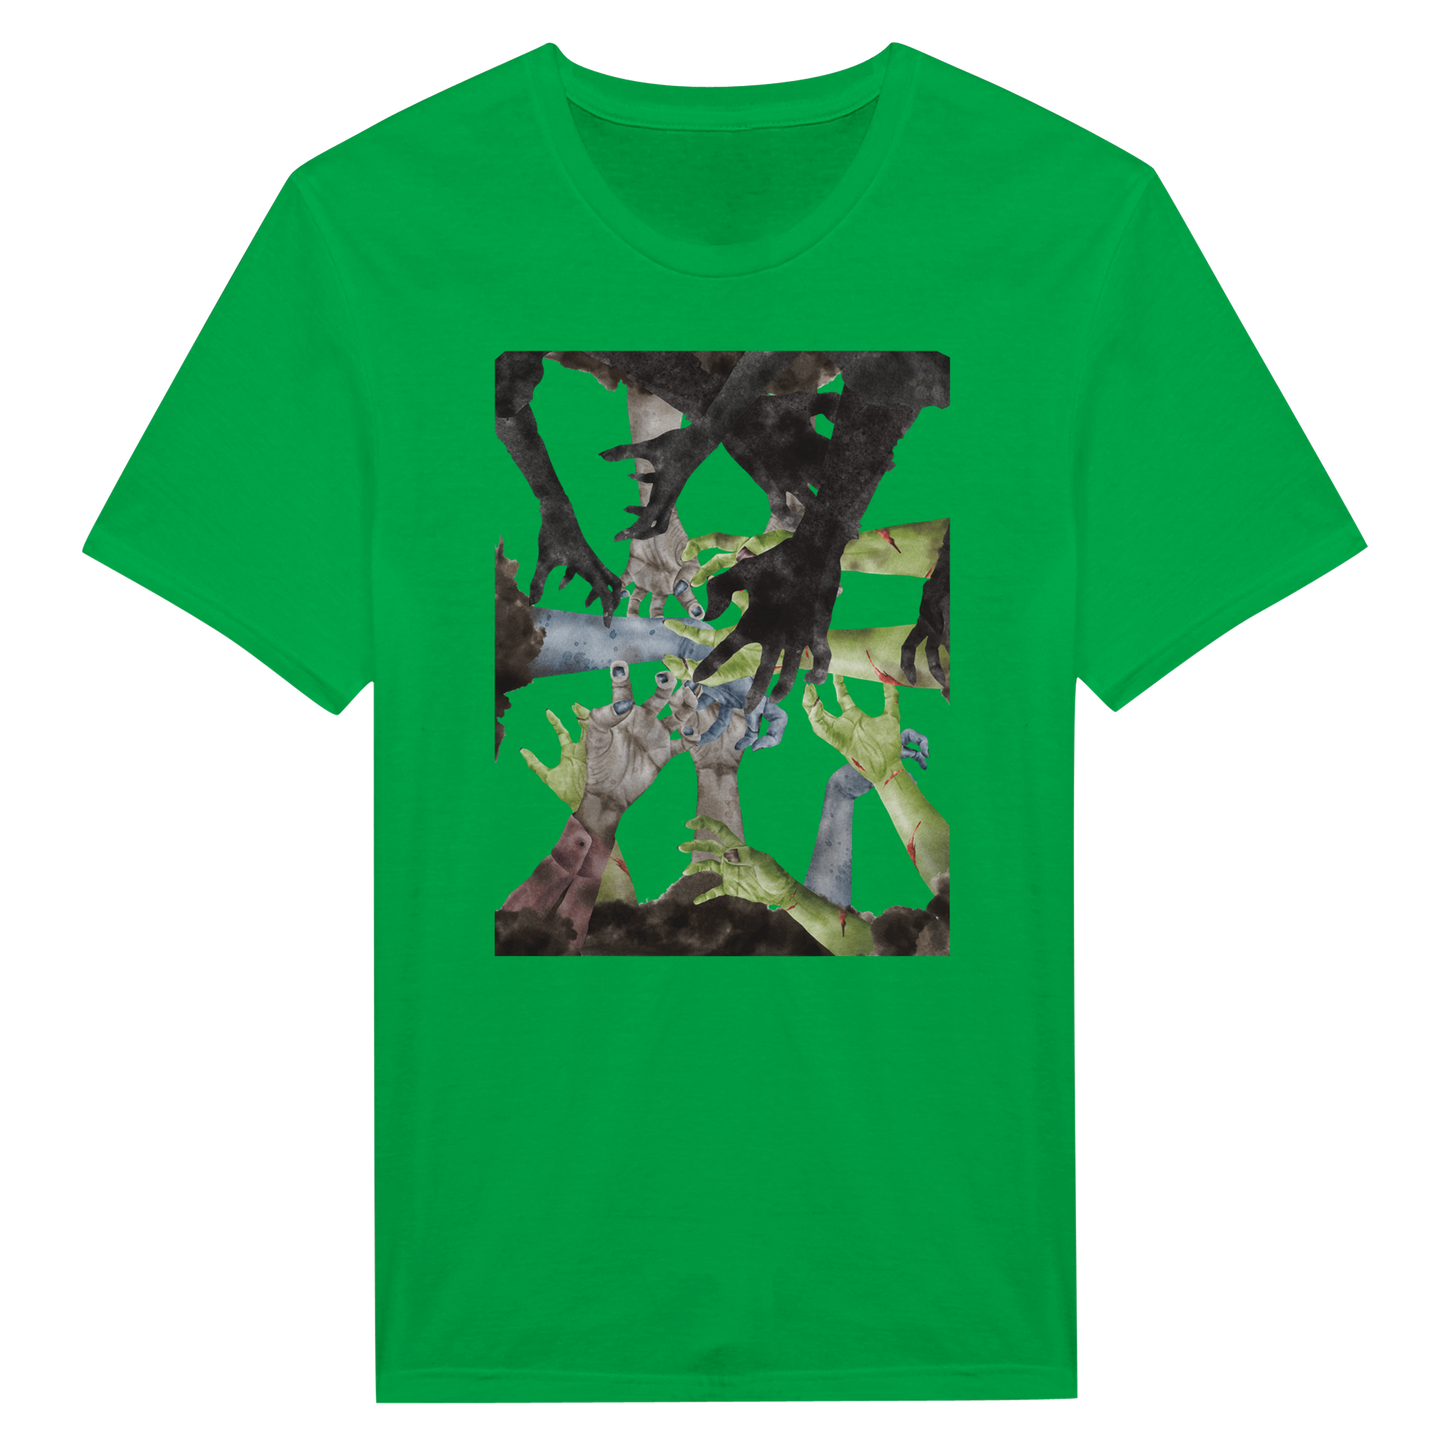 Green Tee Shirt with zombie hands reaching in the center.